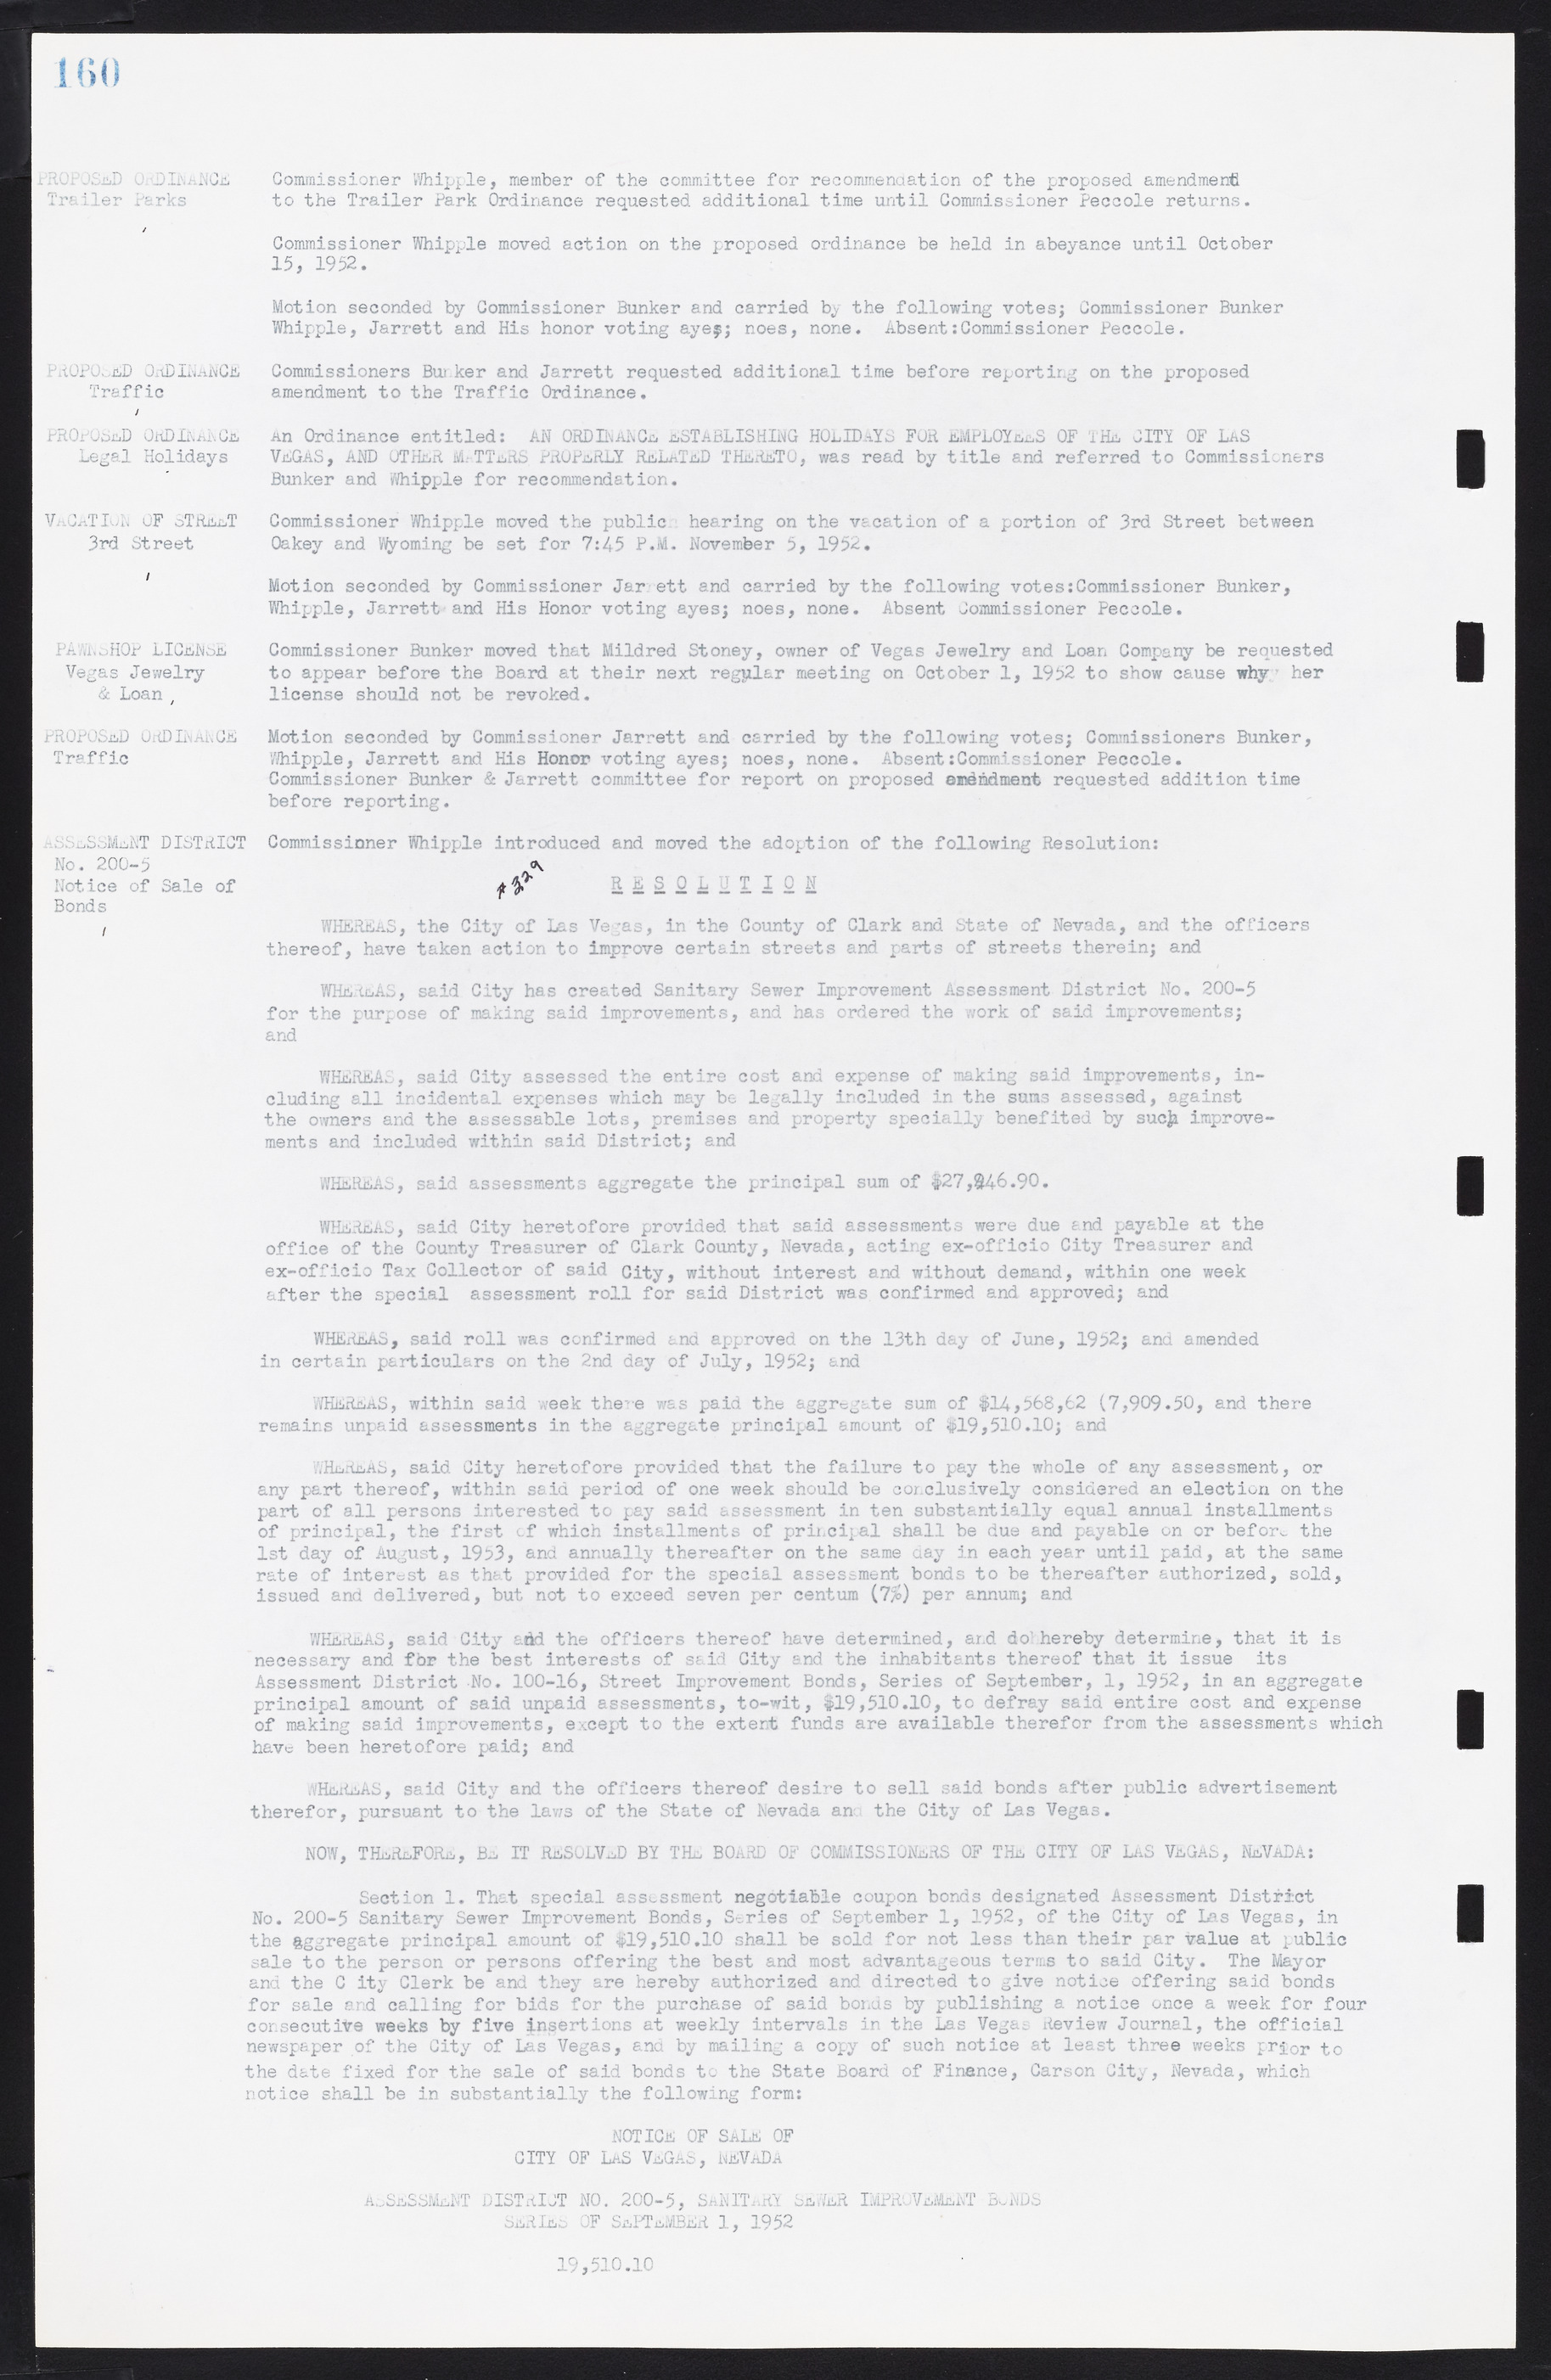 Las Vegas City Commission Minutes, May 26, 1952 to February 17, 1954, lvc000008-174